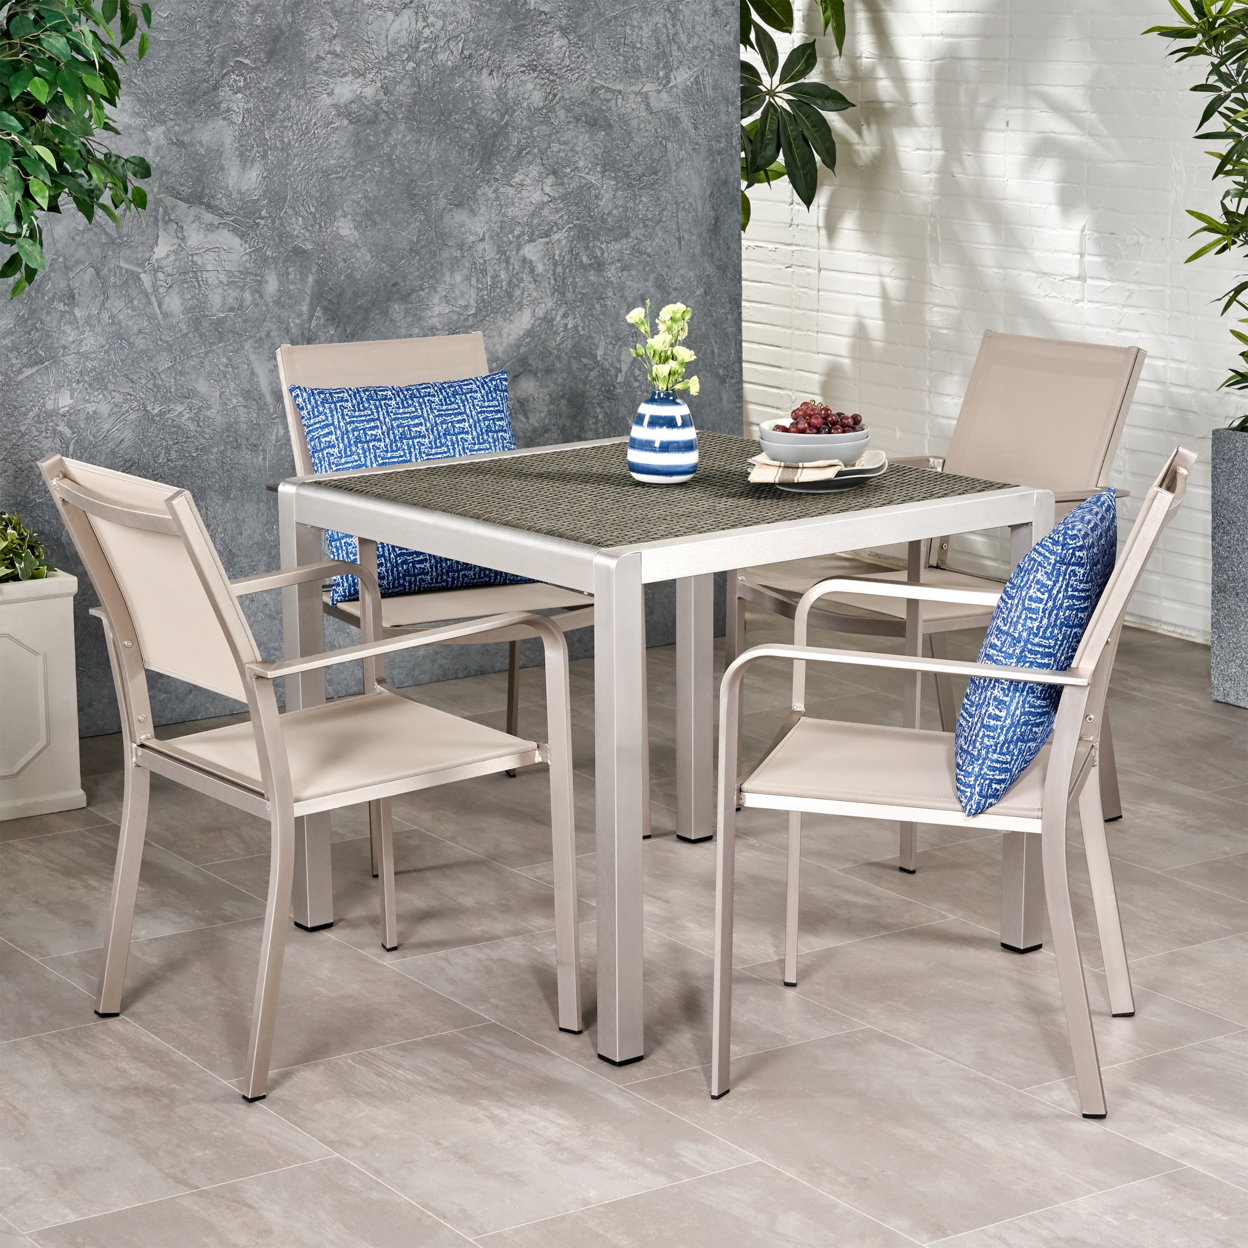 Annabelle Outdoor Modern 4 Seater Aluminum Dining Set With Faux Wood Table Top - Aluminum + Faux Rattan + Outdoor Mesh